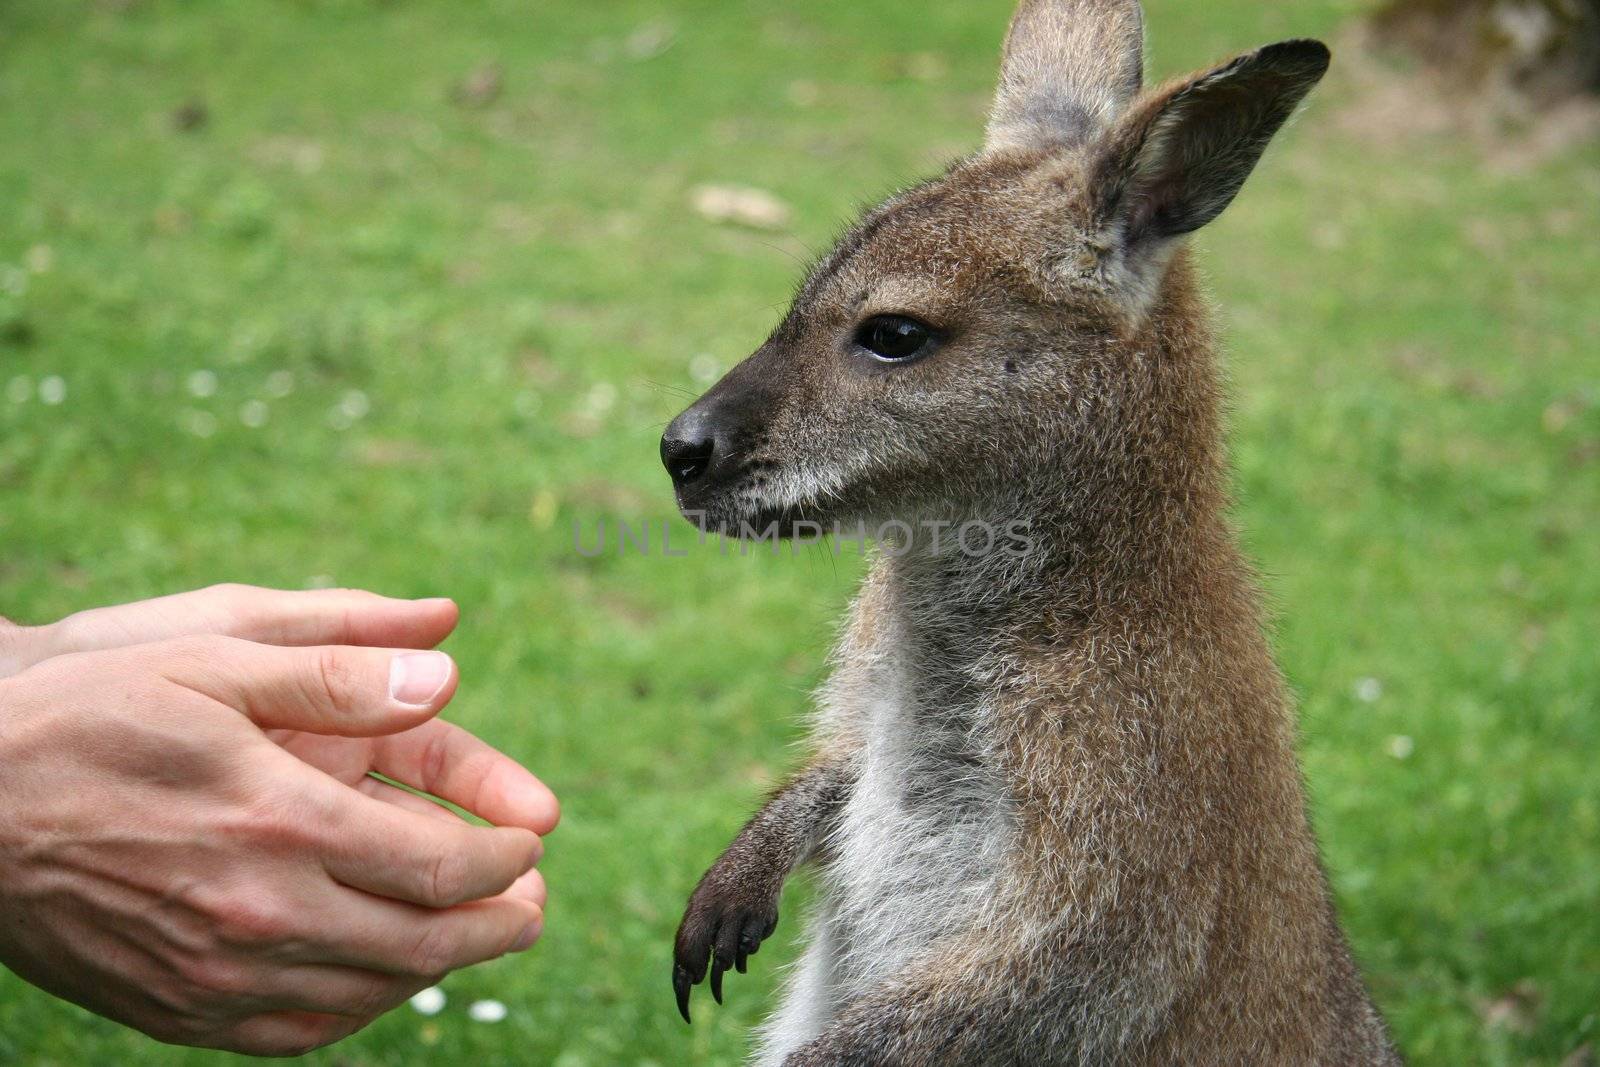 Man trying to shake hands with a small kangaroo